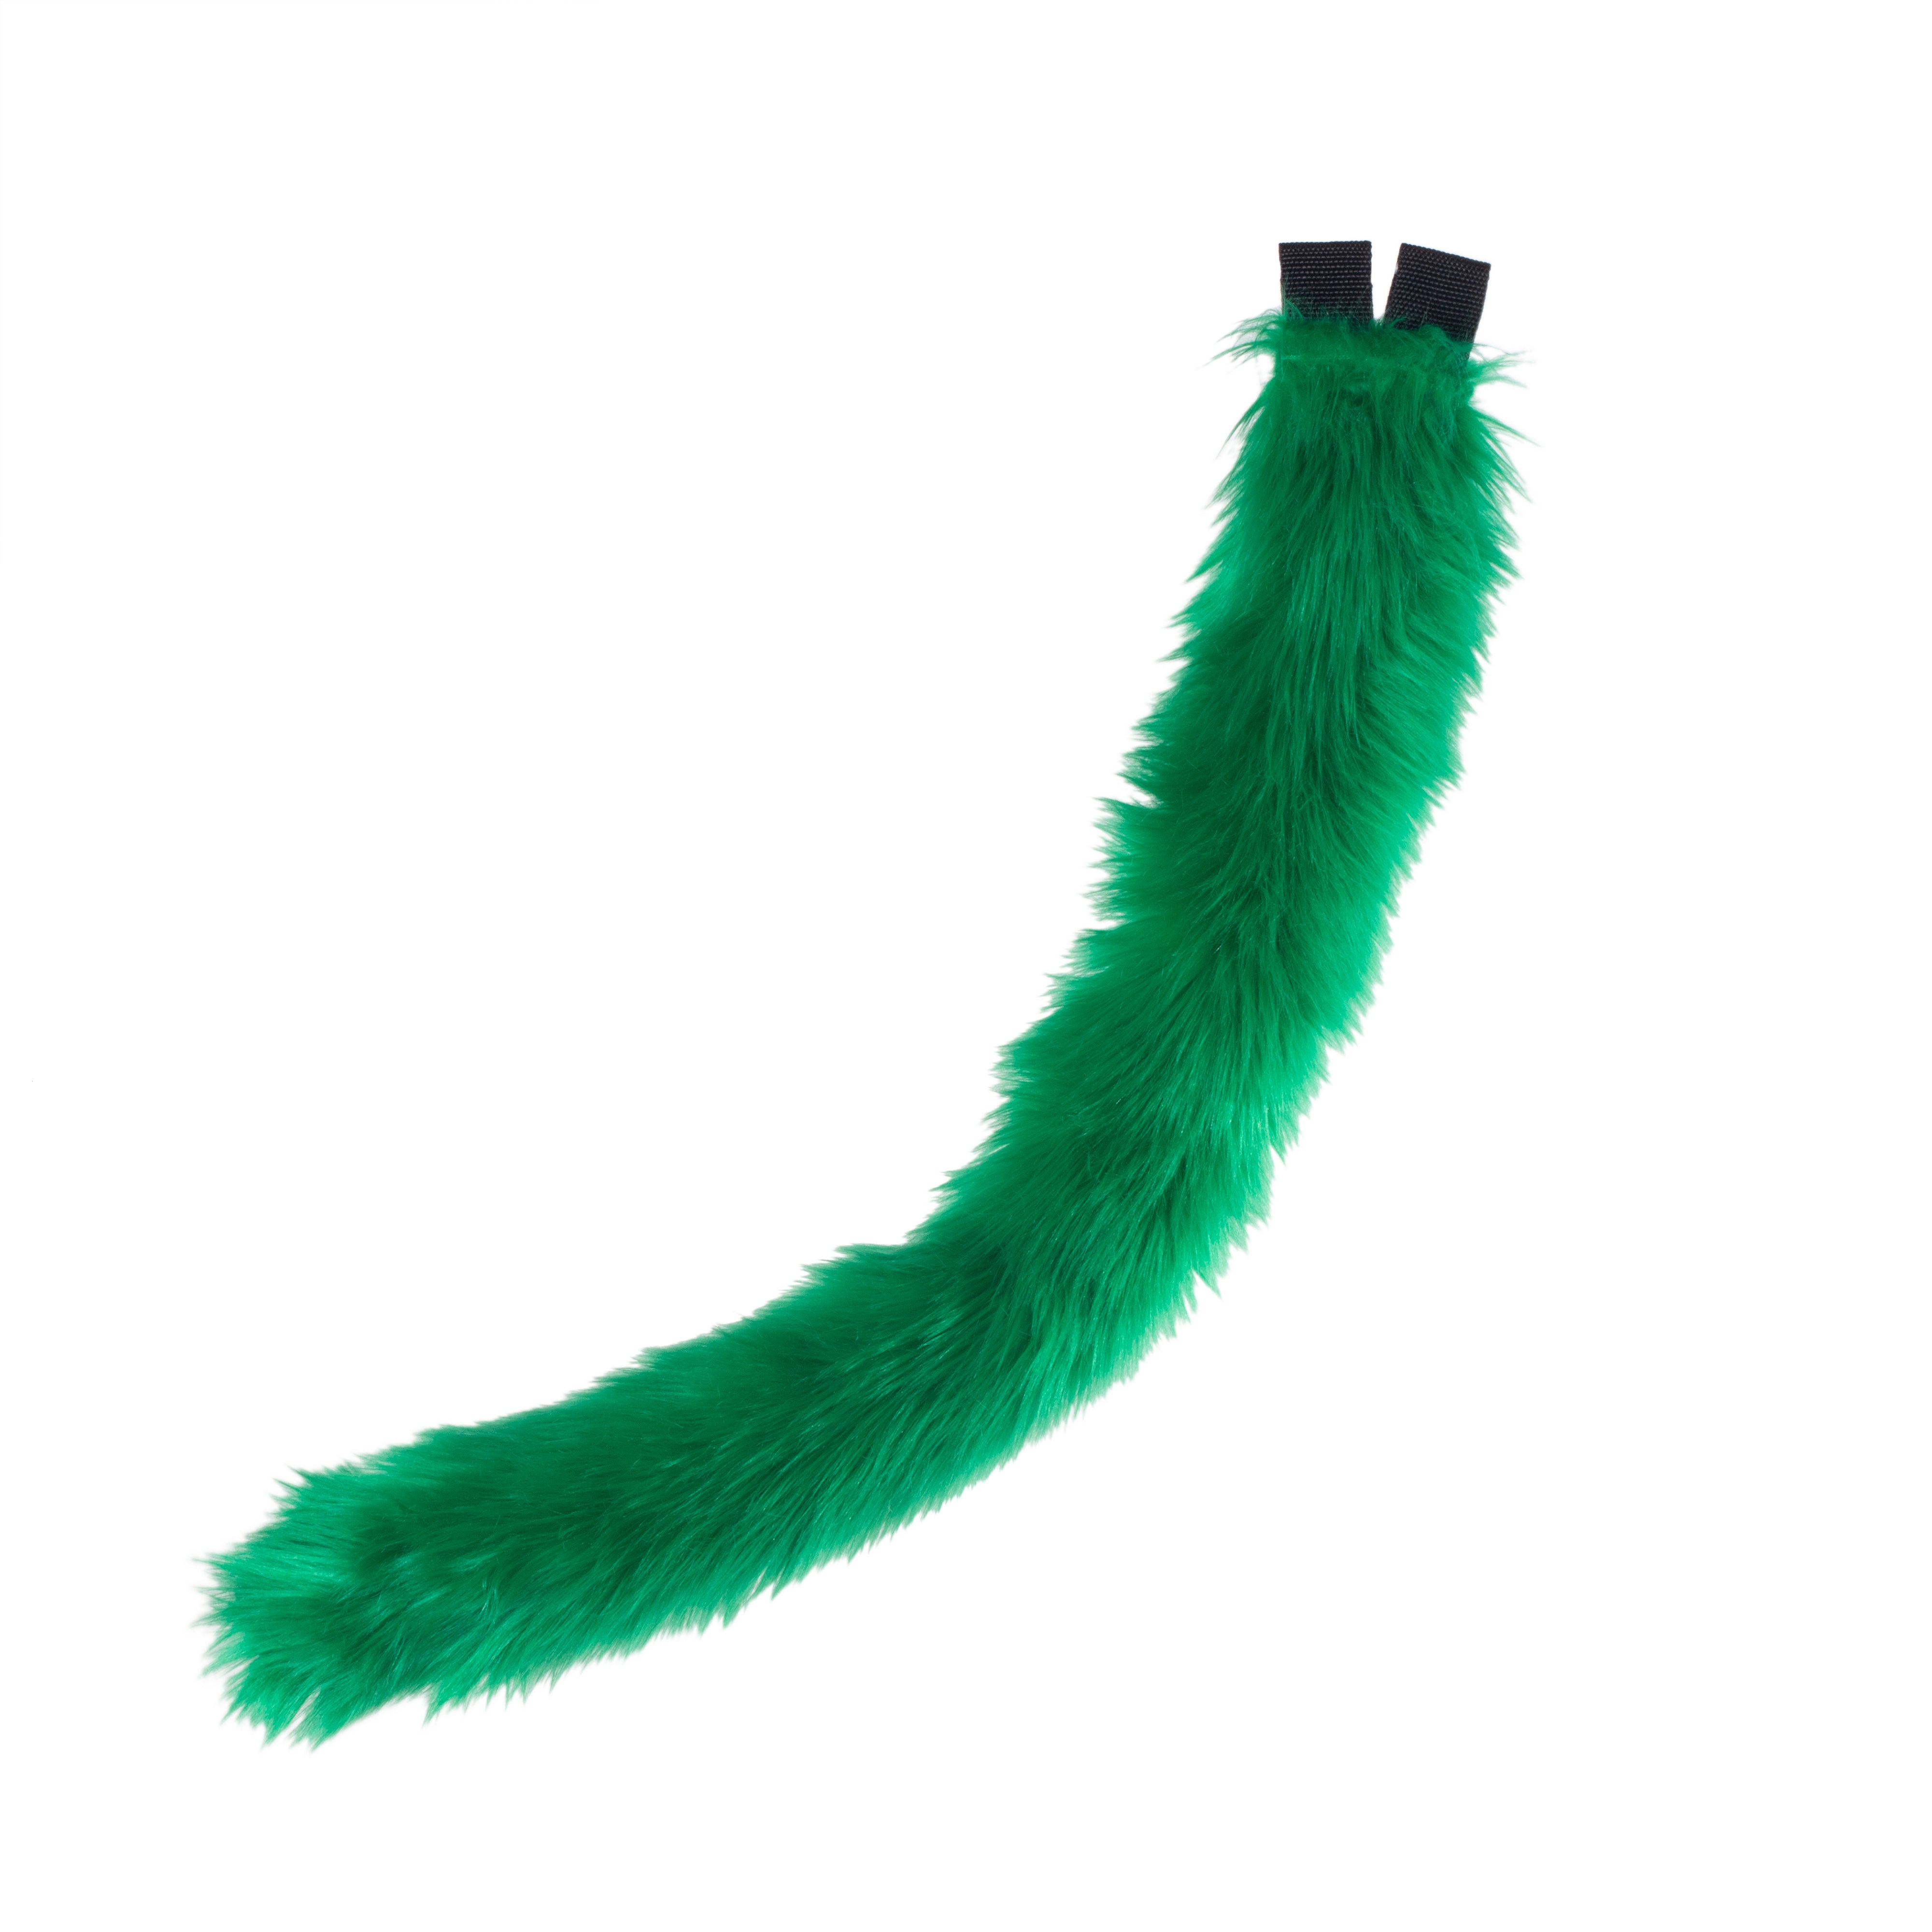 Pawstar classic original faux fur kitty cat costume tail for cosplay and partial furry fursuits. Unisex adult halloween costume.